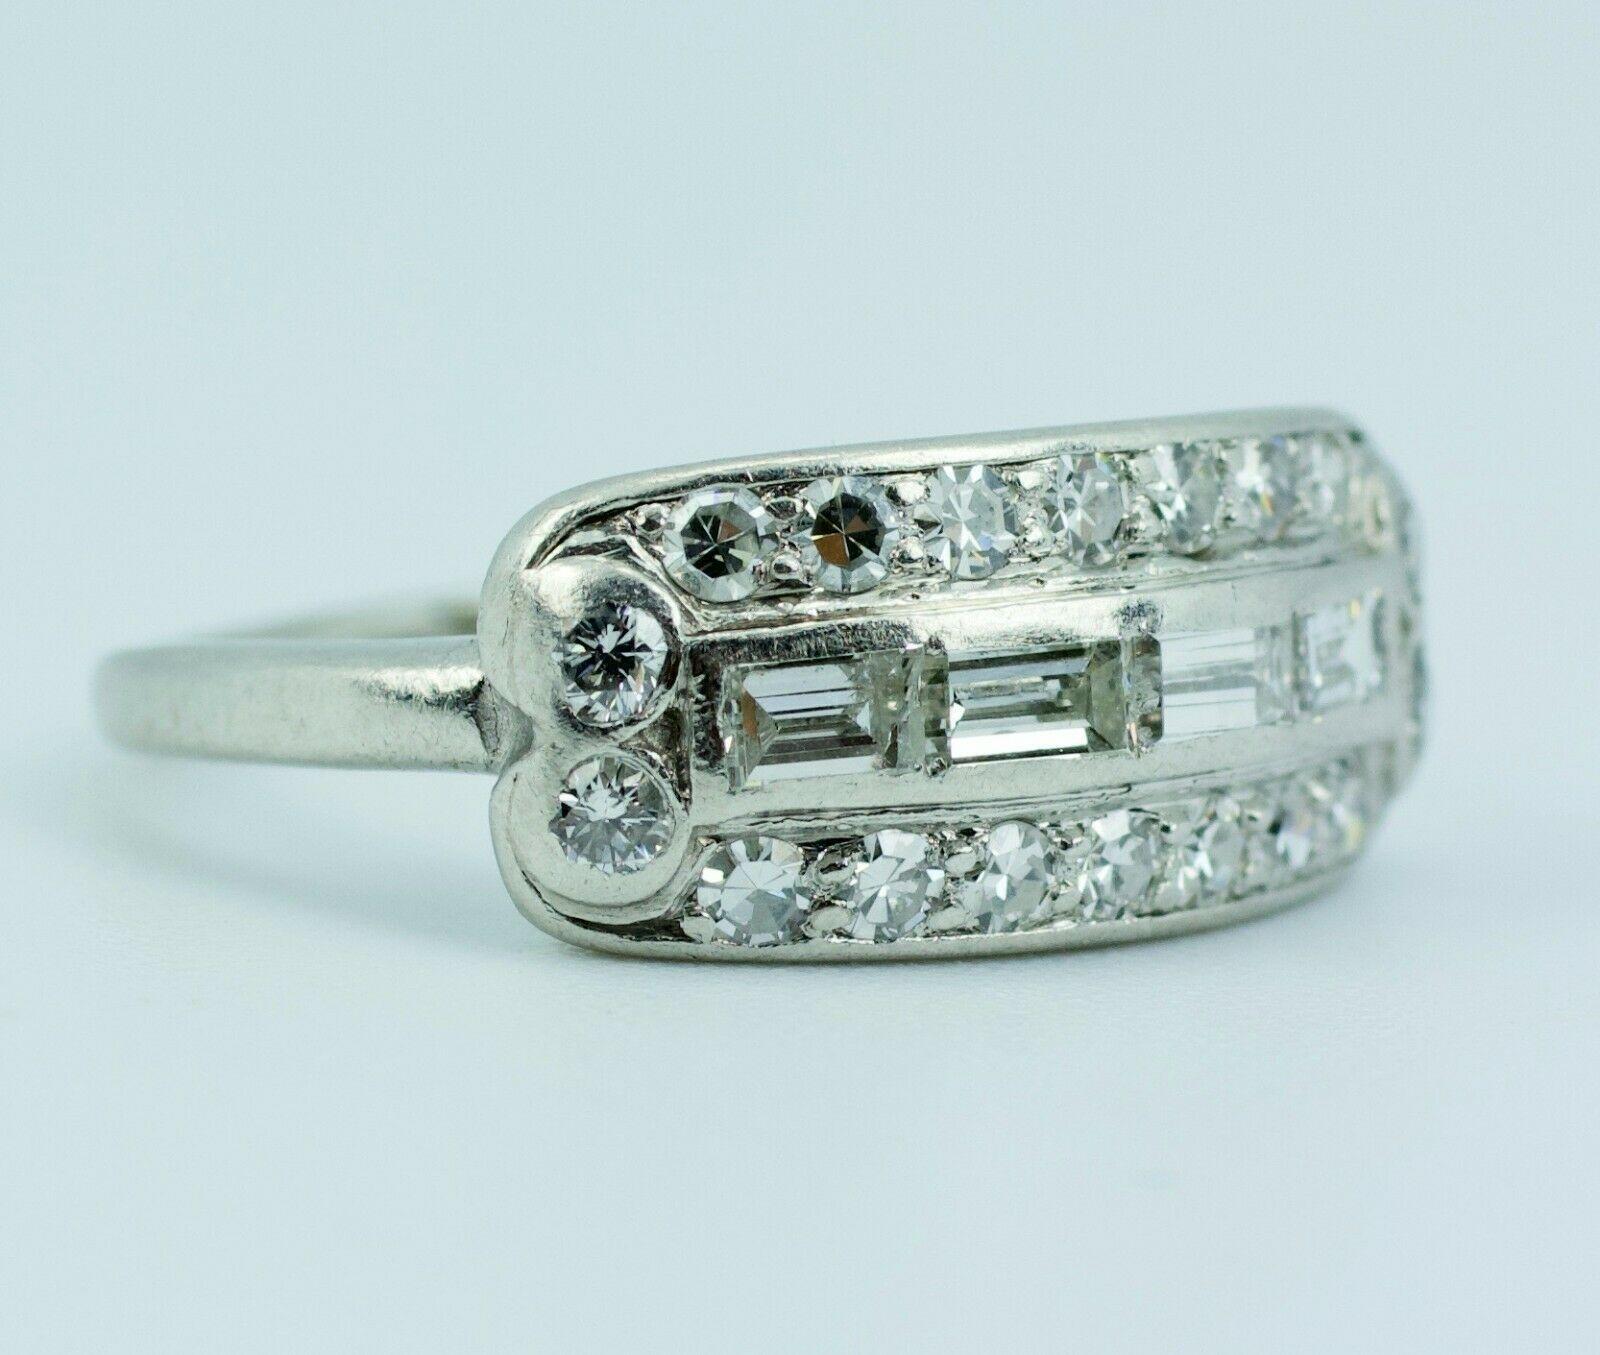 Art Deco Platinum Round Single Cut And Baguette Diamond Ring 

Size 5

4.1 Grams

Round Single Cut Diamonds 0.14 Carats Total Weight

4 Baguette Cut Diamonds 0.36 Carats Total Weight

Color: G-H Clarity: VS2

This is a gorgeous 10% Iridium 90%